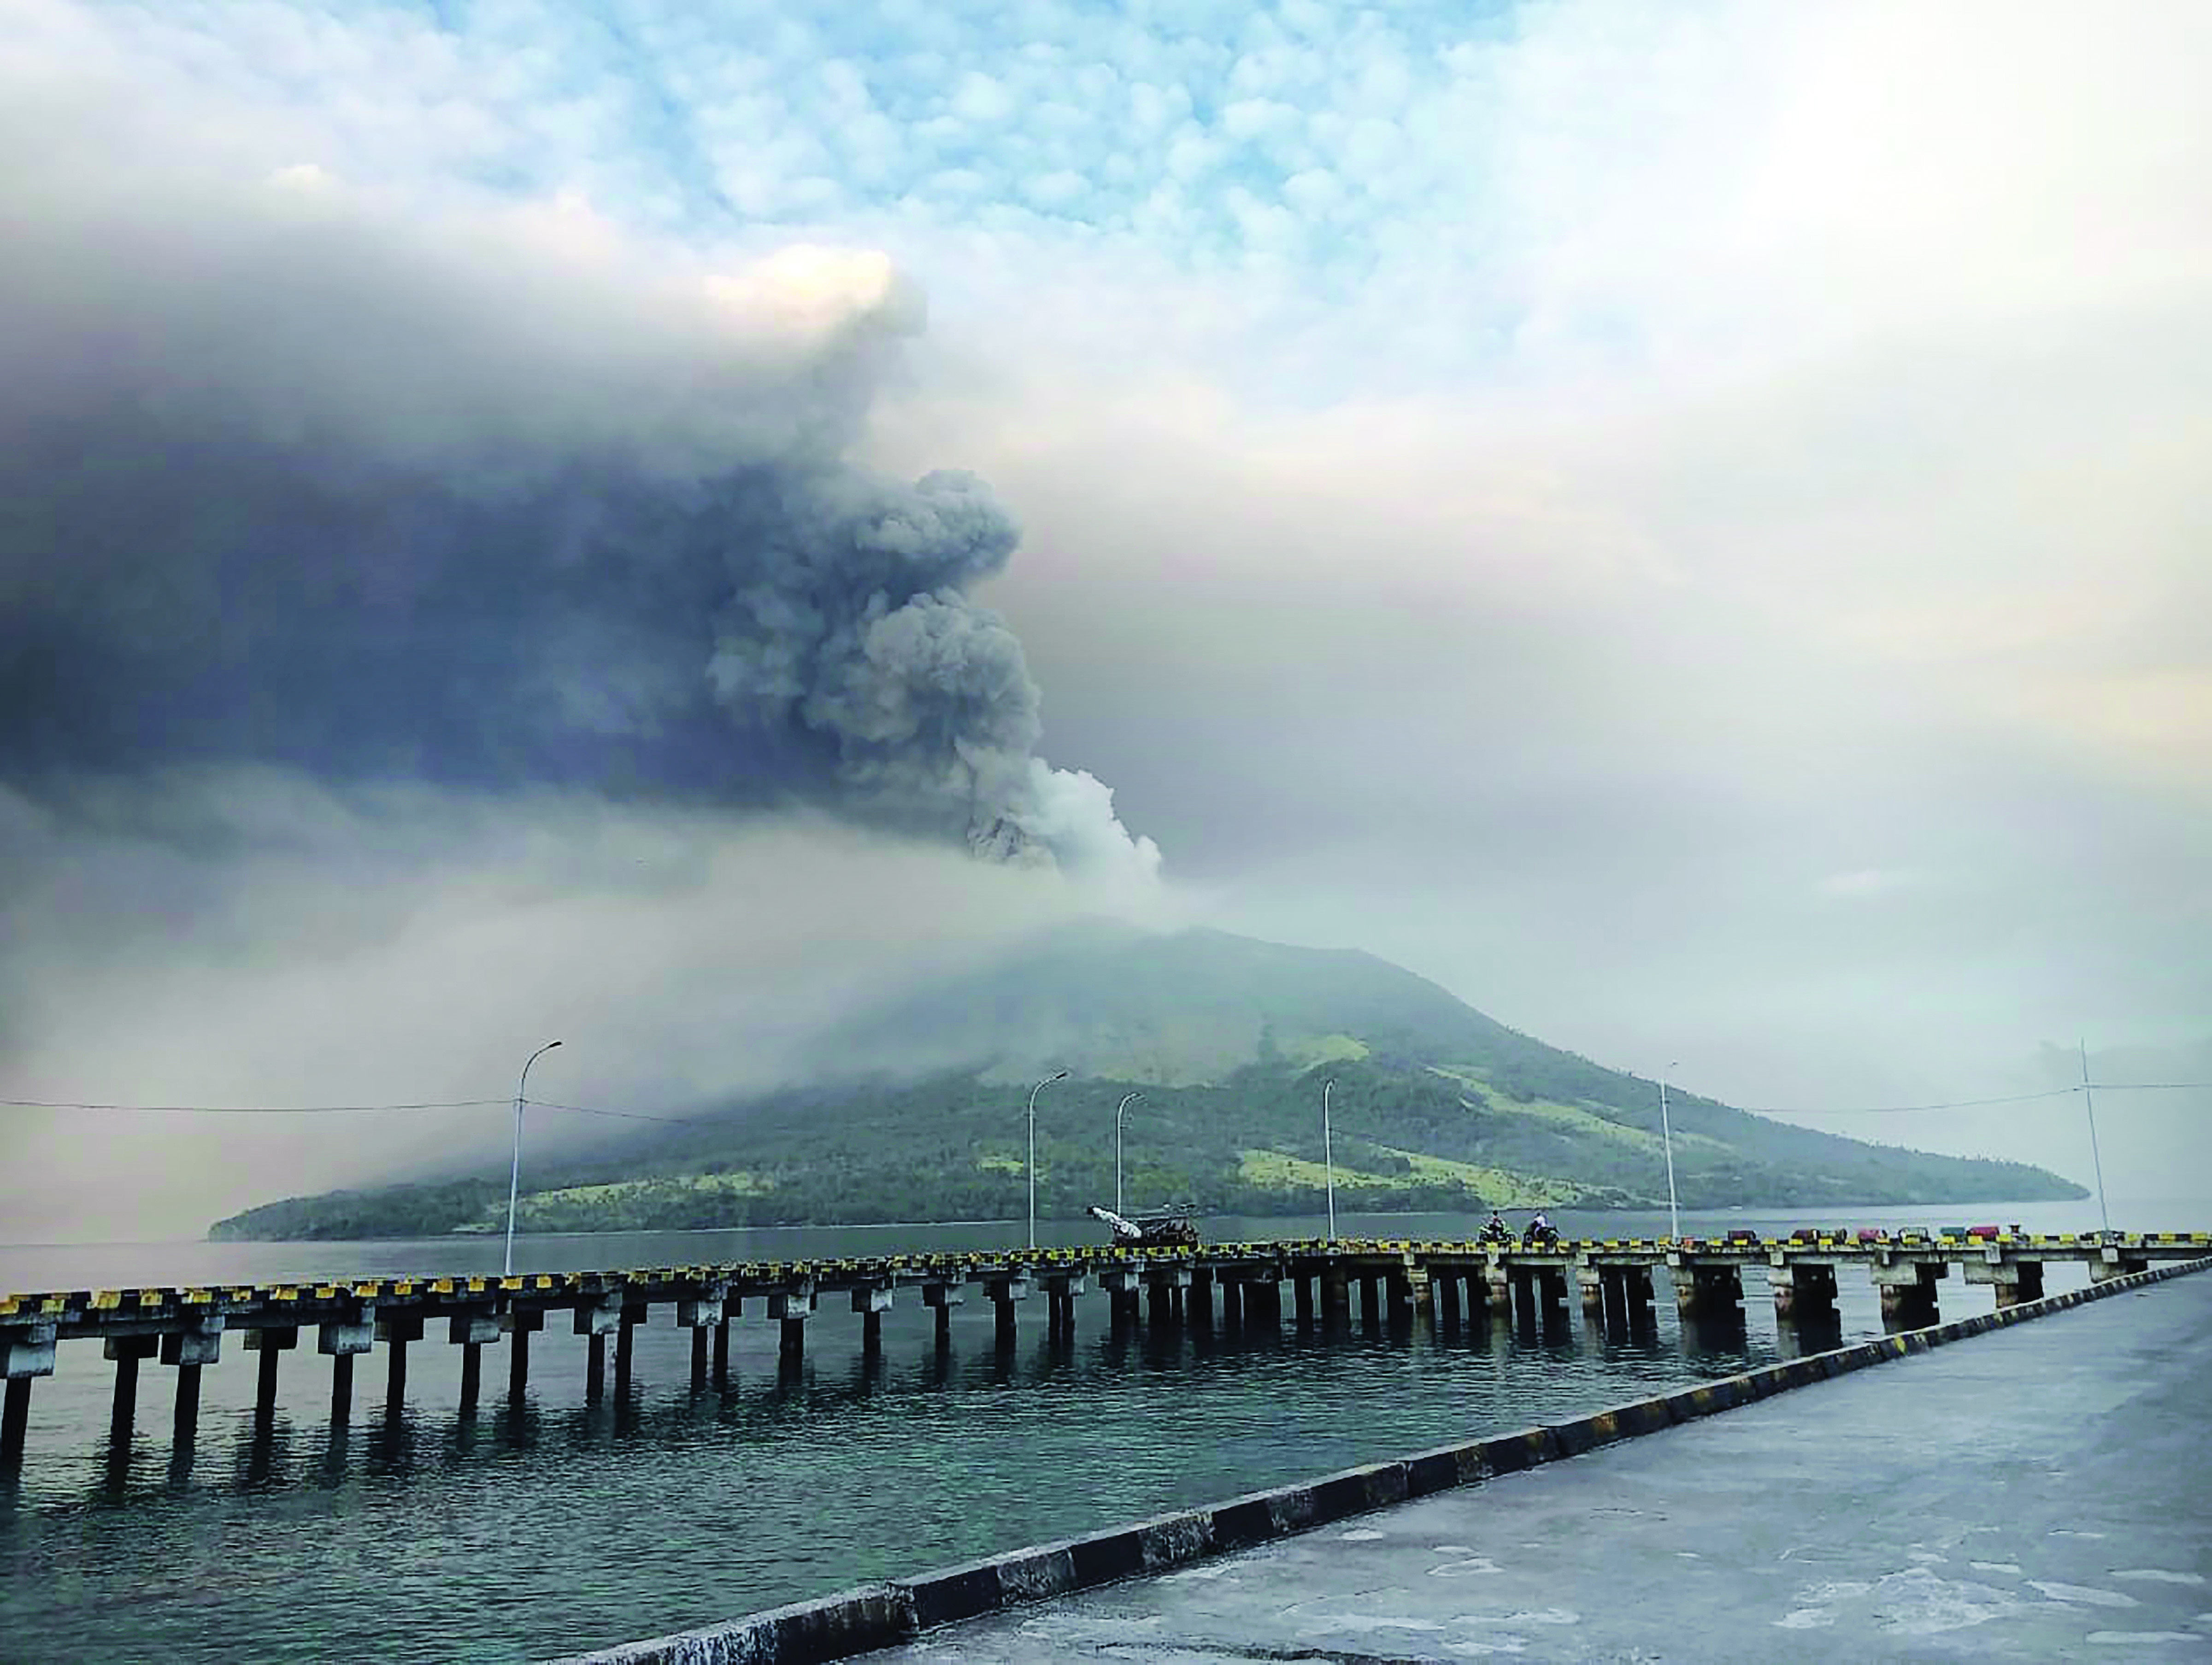 More people evacuated after dramatic eruption of Indonesian volcano